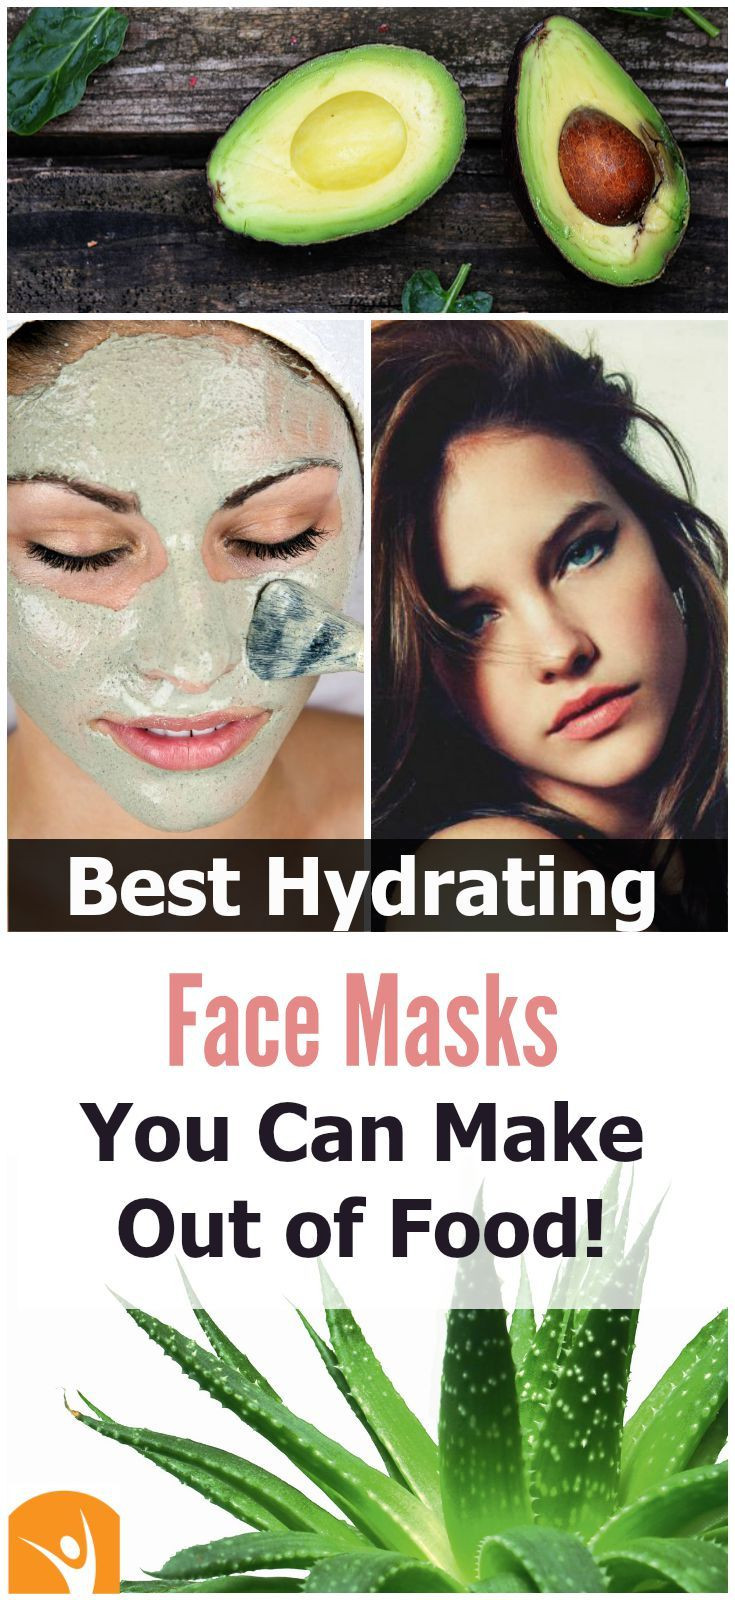 Hydrating Face Masks DIY
 Best Hydrating Face Masks You Can Make out of Food